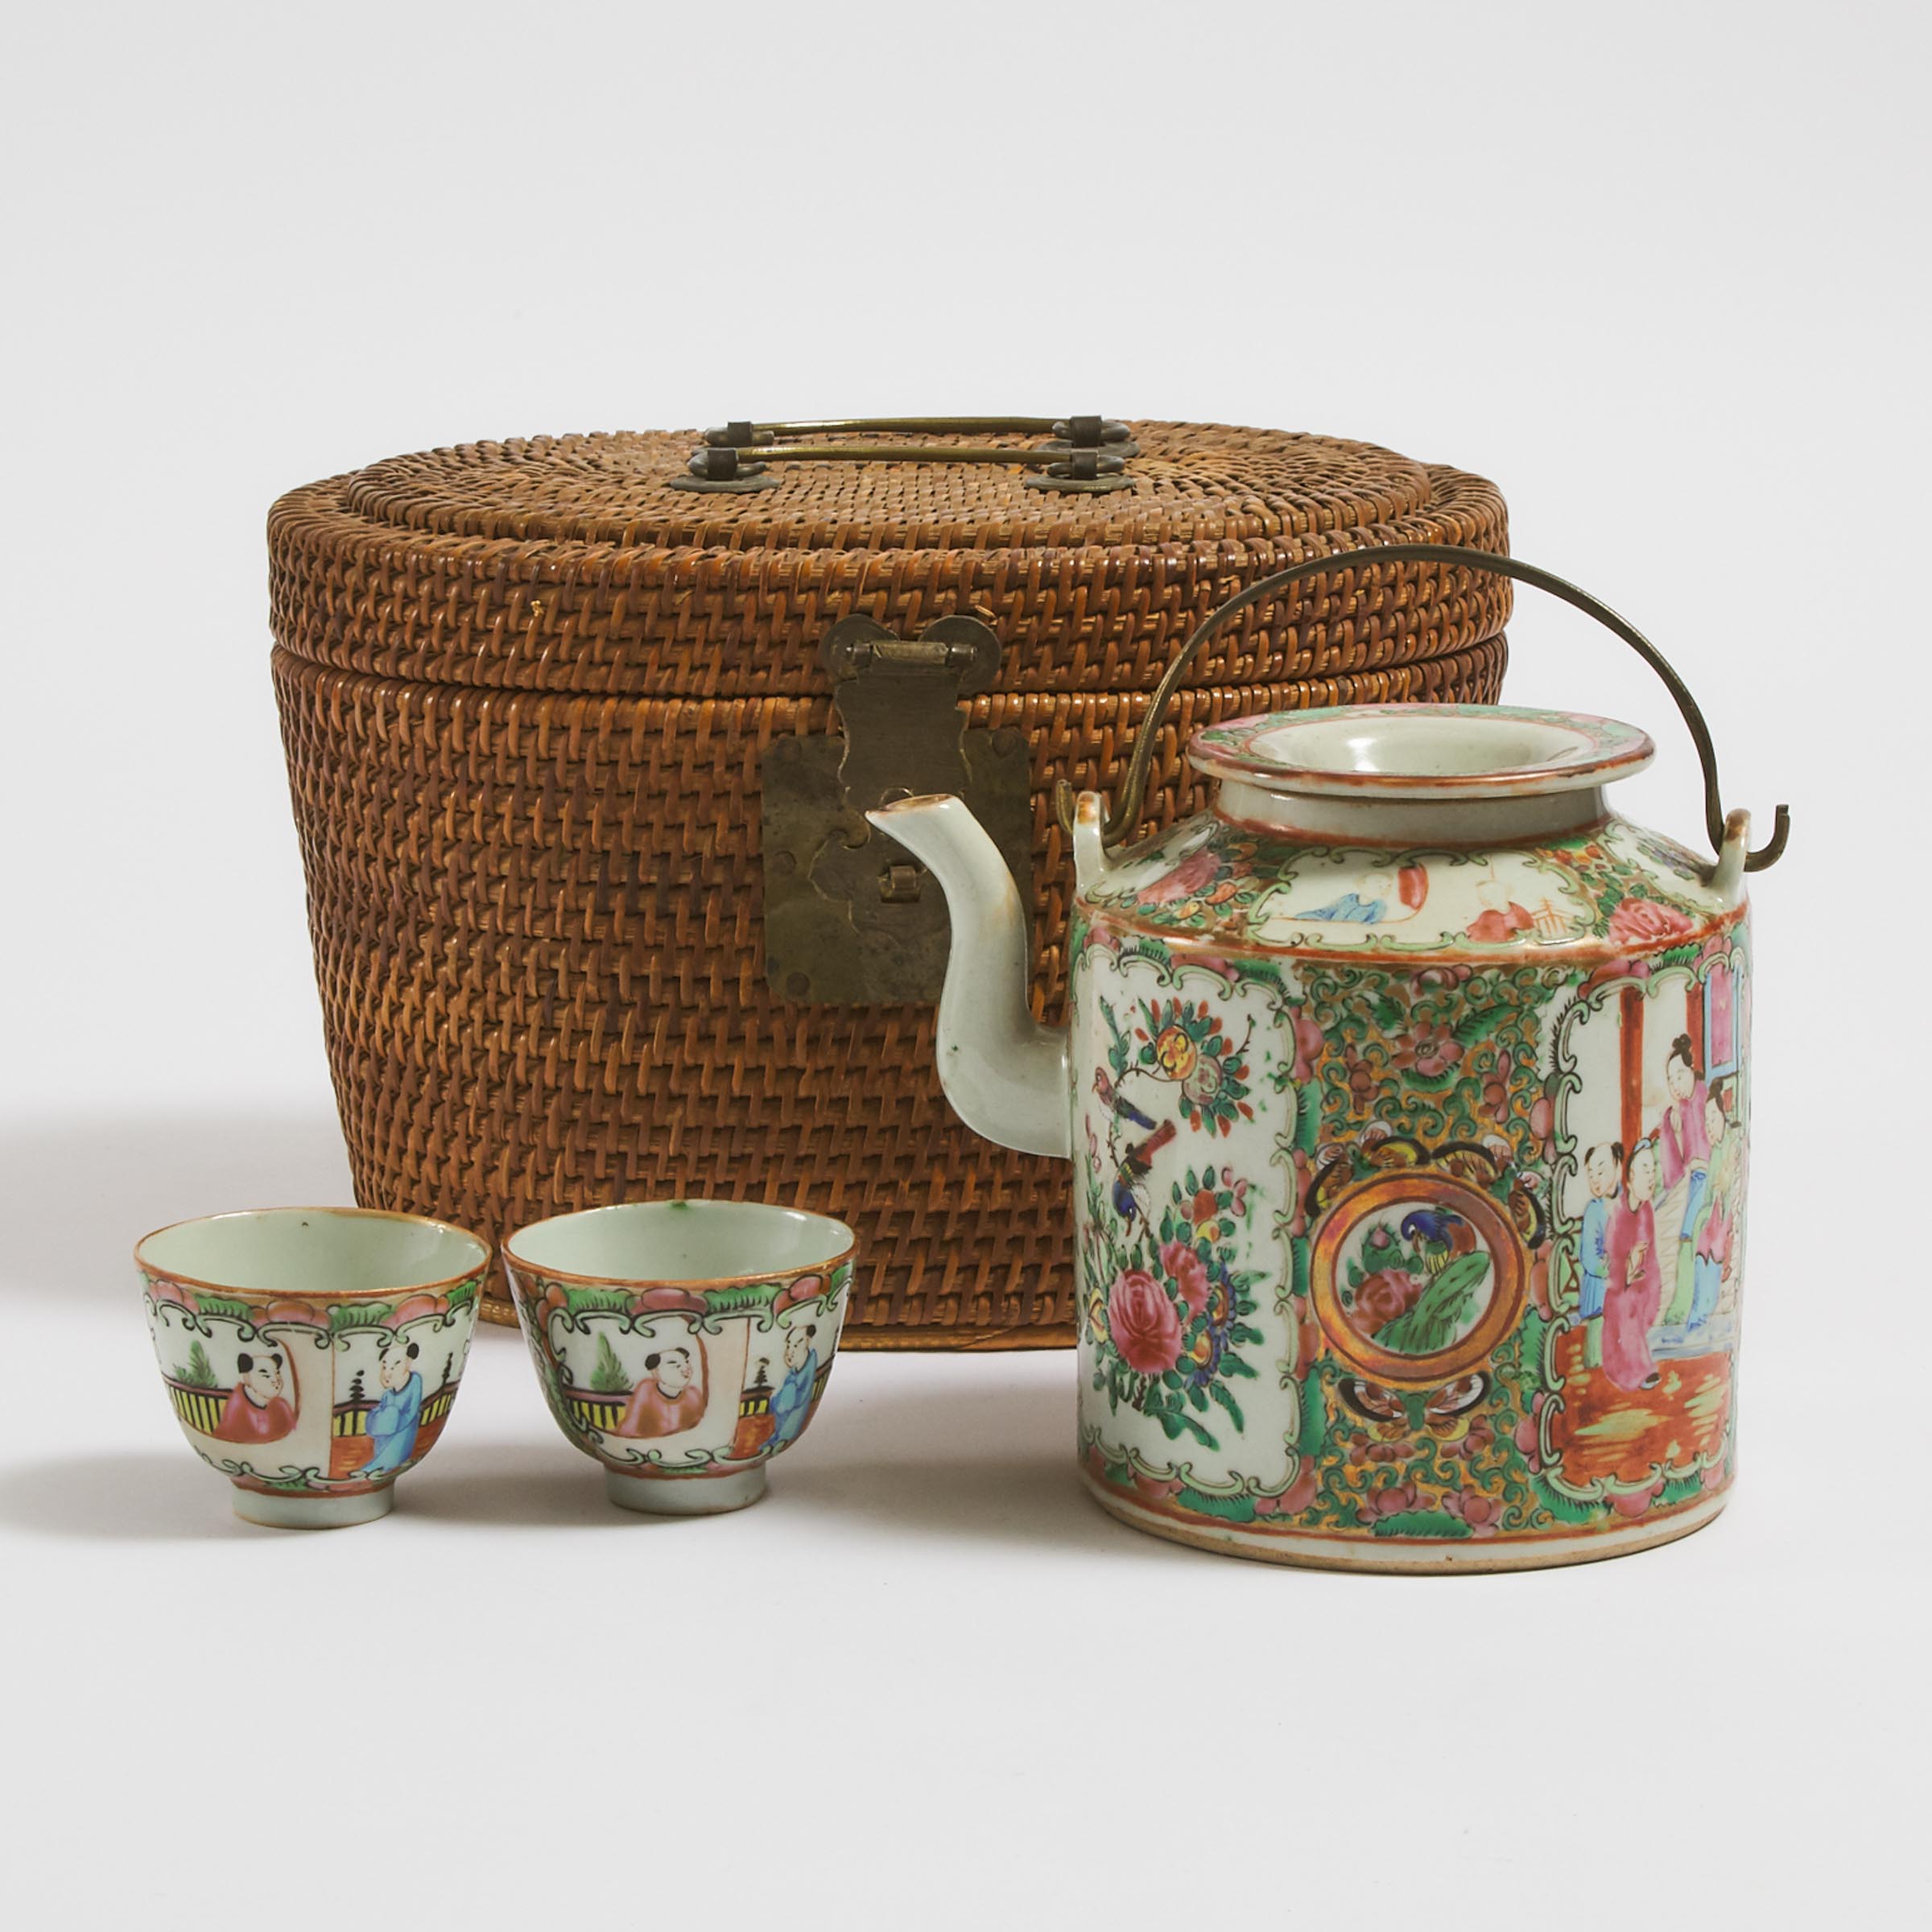 A Canton Famille Rose Set of Two Teacups and a Teapot, Together With a Bamboo Storage Basket, Circa 1930